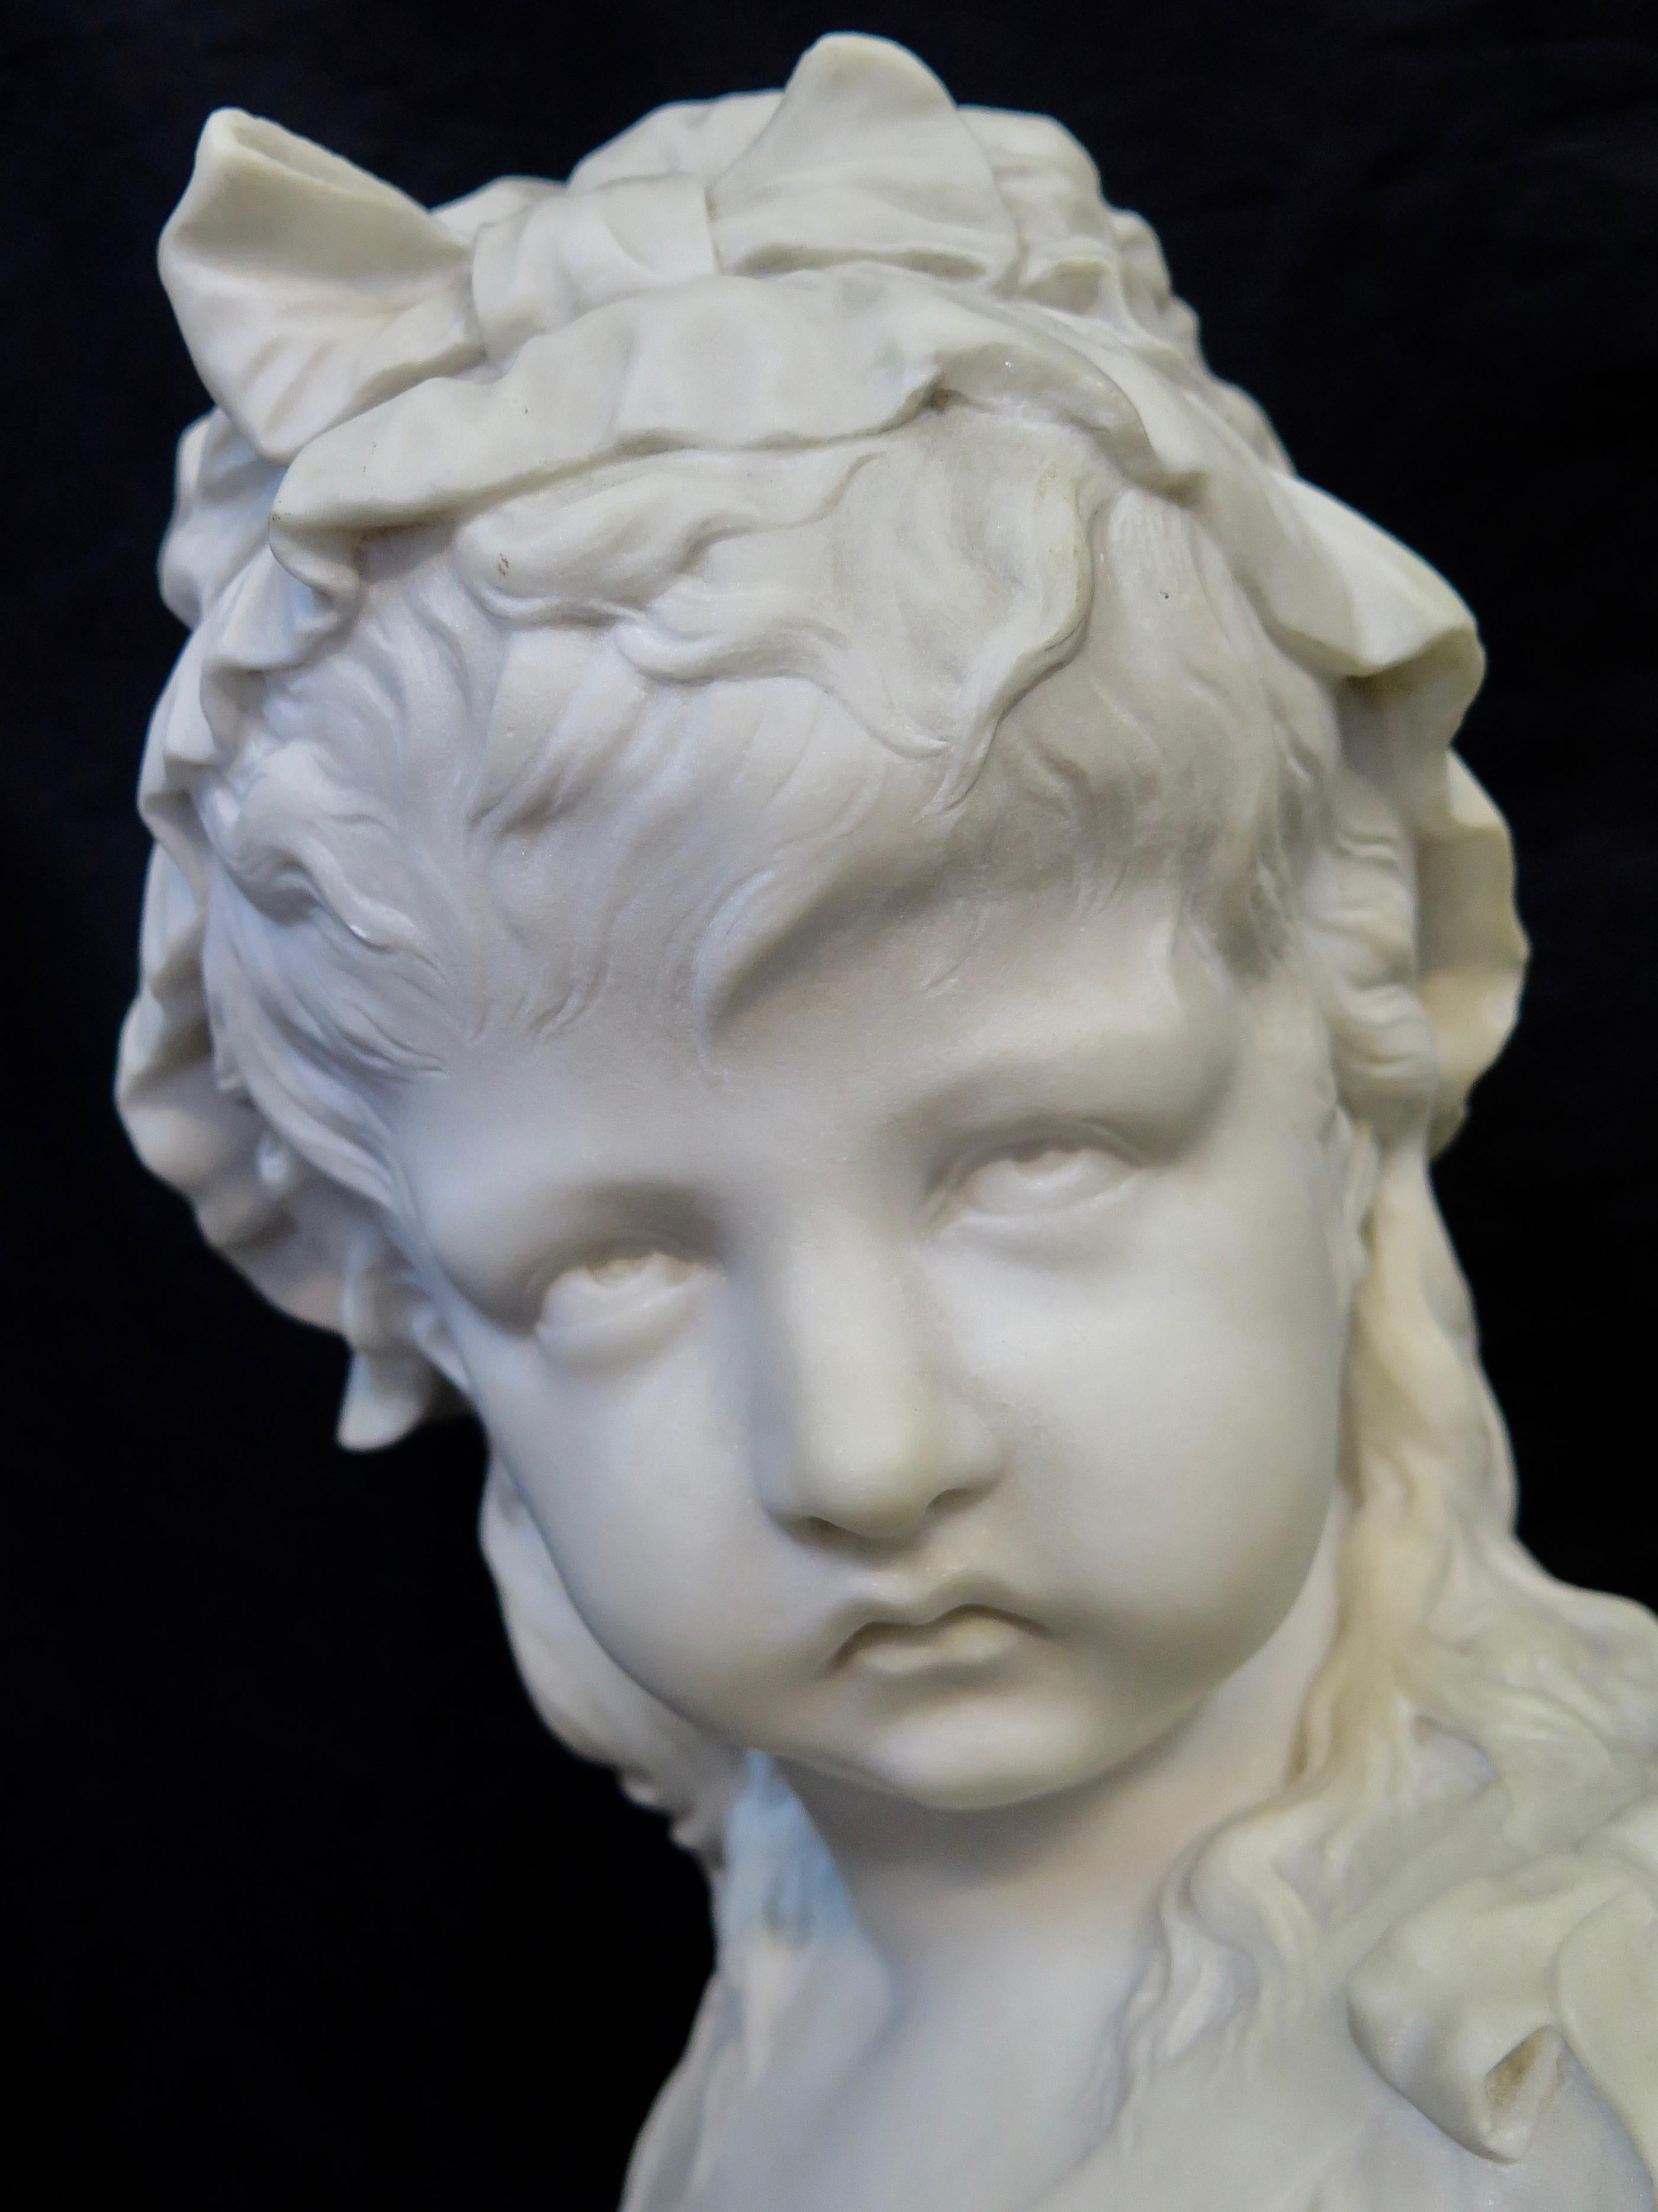 This vintage 19th century marble sculpture depicts the bust of a young French girl. The artist seems to be showcasing the anguish of the French Revolution through the eyes of this young innocent victim. The artist, Joseph Nelson's depiction is